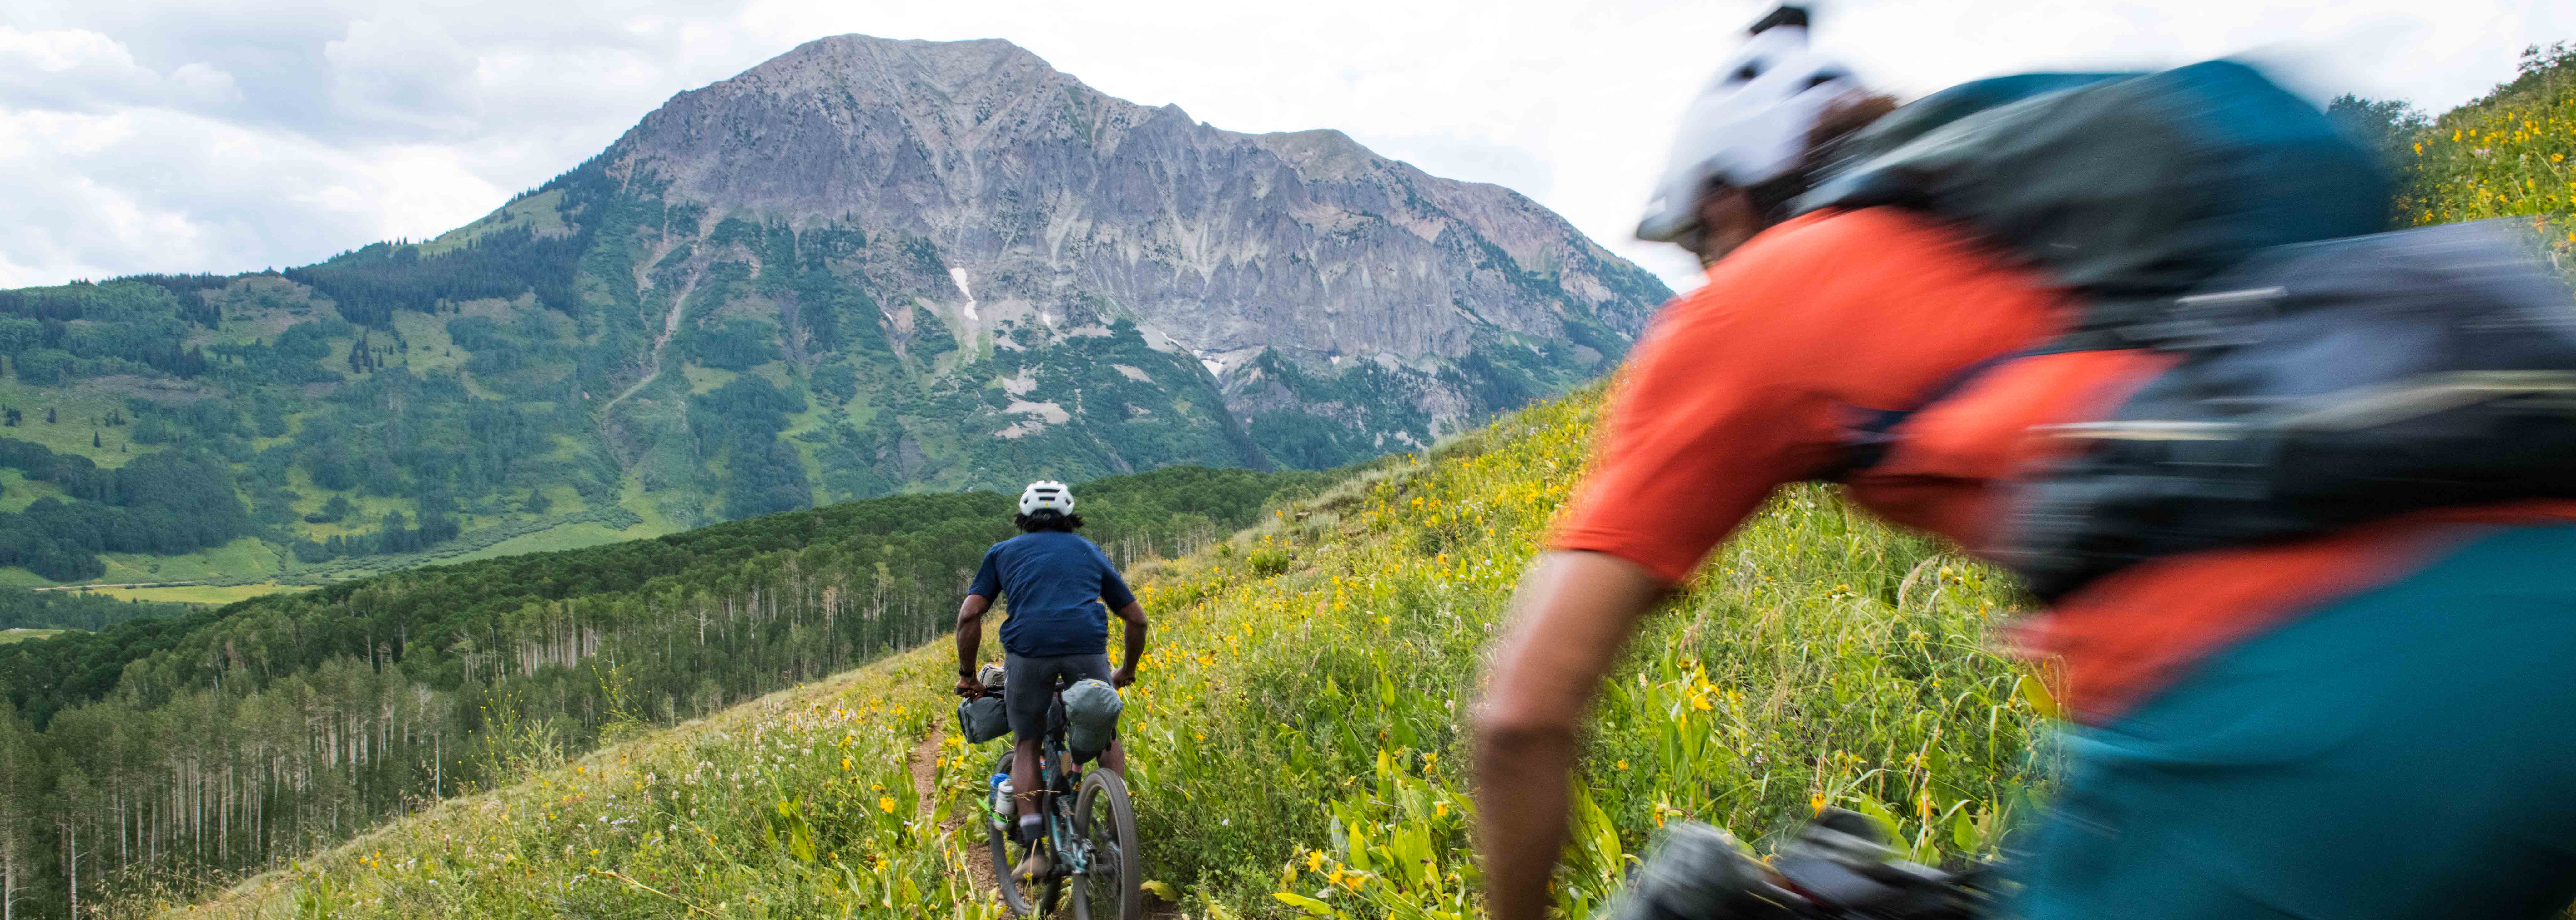 Two riders riding on a trail lined with wildflowers, toward a high alpine mountain in the distance